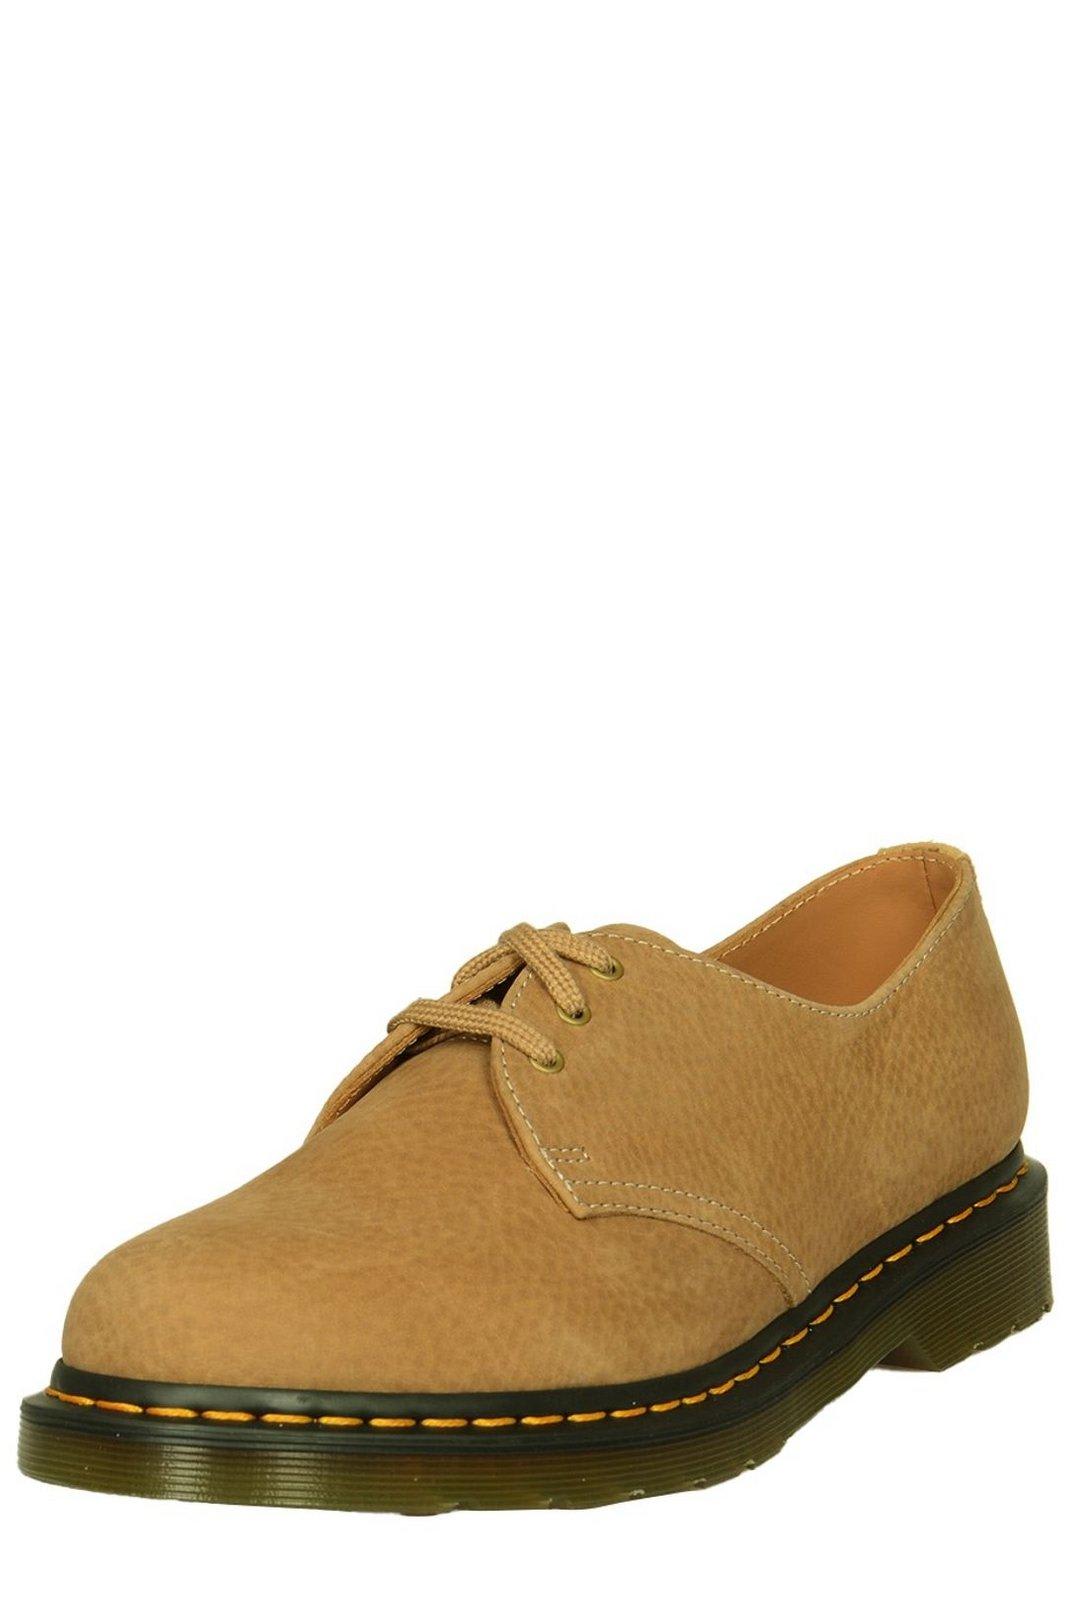 Shop Dr. Martens' 1461 Lace-up Oxford Shoes In Savannah Tan Tumbled Nubuck